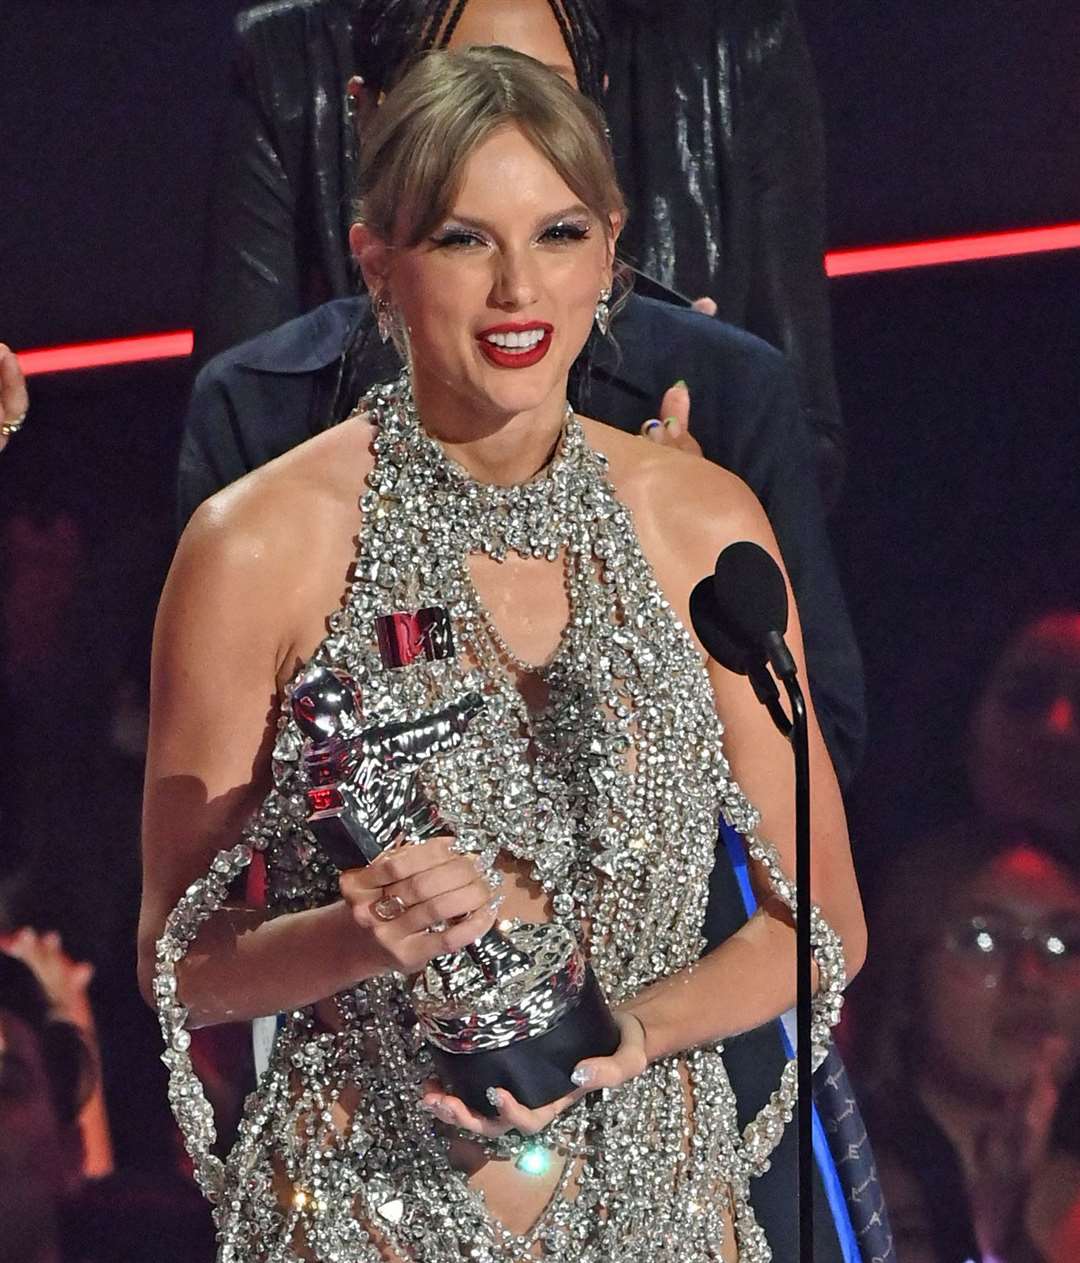 Taylor Swift accepts the award for video of the year for “All Too Well” (10 Minute Version) (Taylor’s Version) on stage at the MTV Video Music Awards 2022 (Doug Peters/PA)